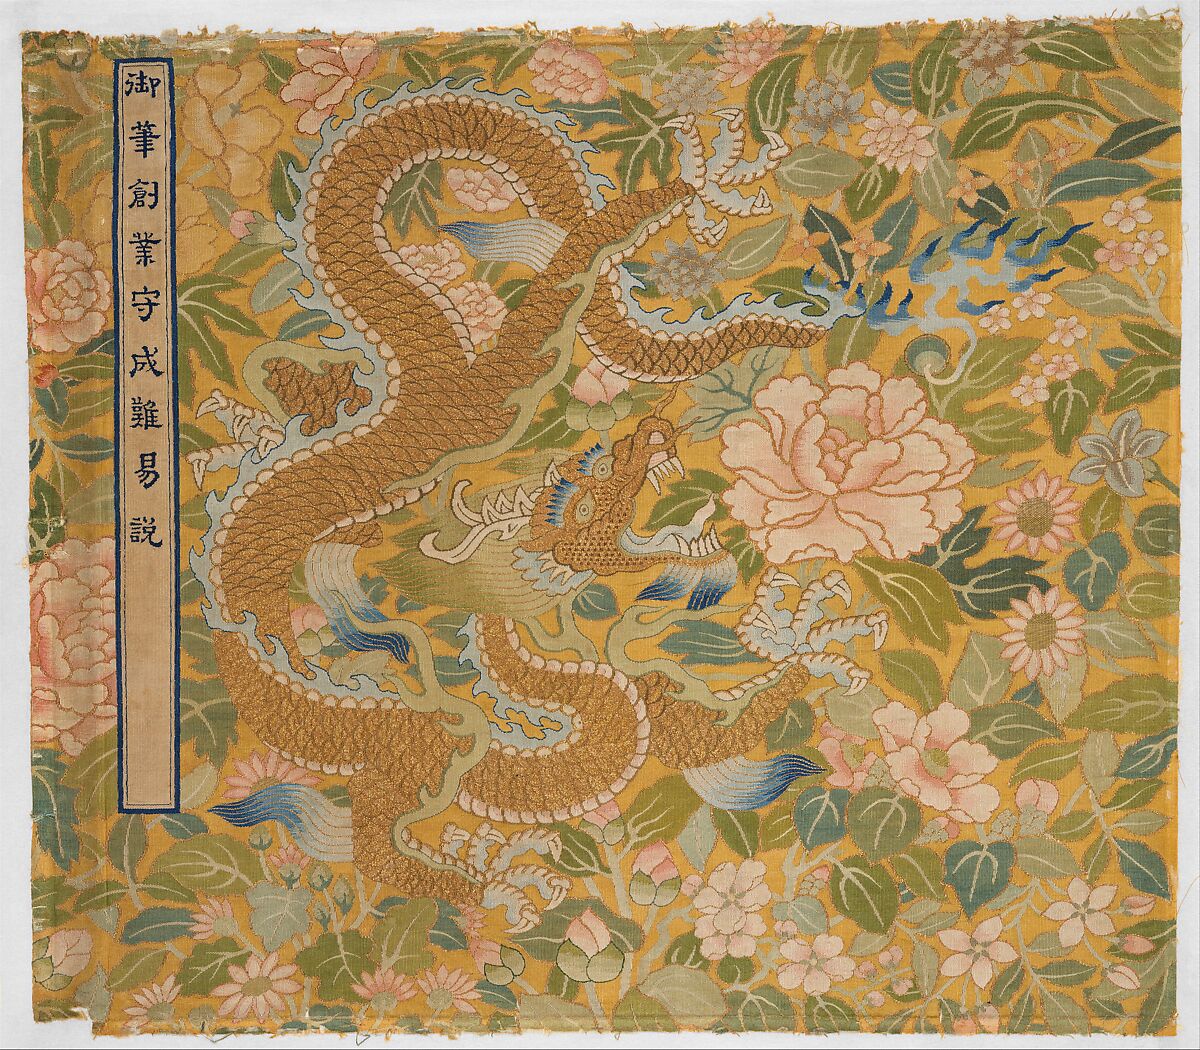 Scroll Cover for Imperial Calligraphy, Silk and metallic thread tapestry (kesi), China 